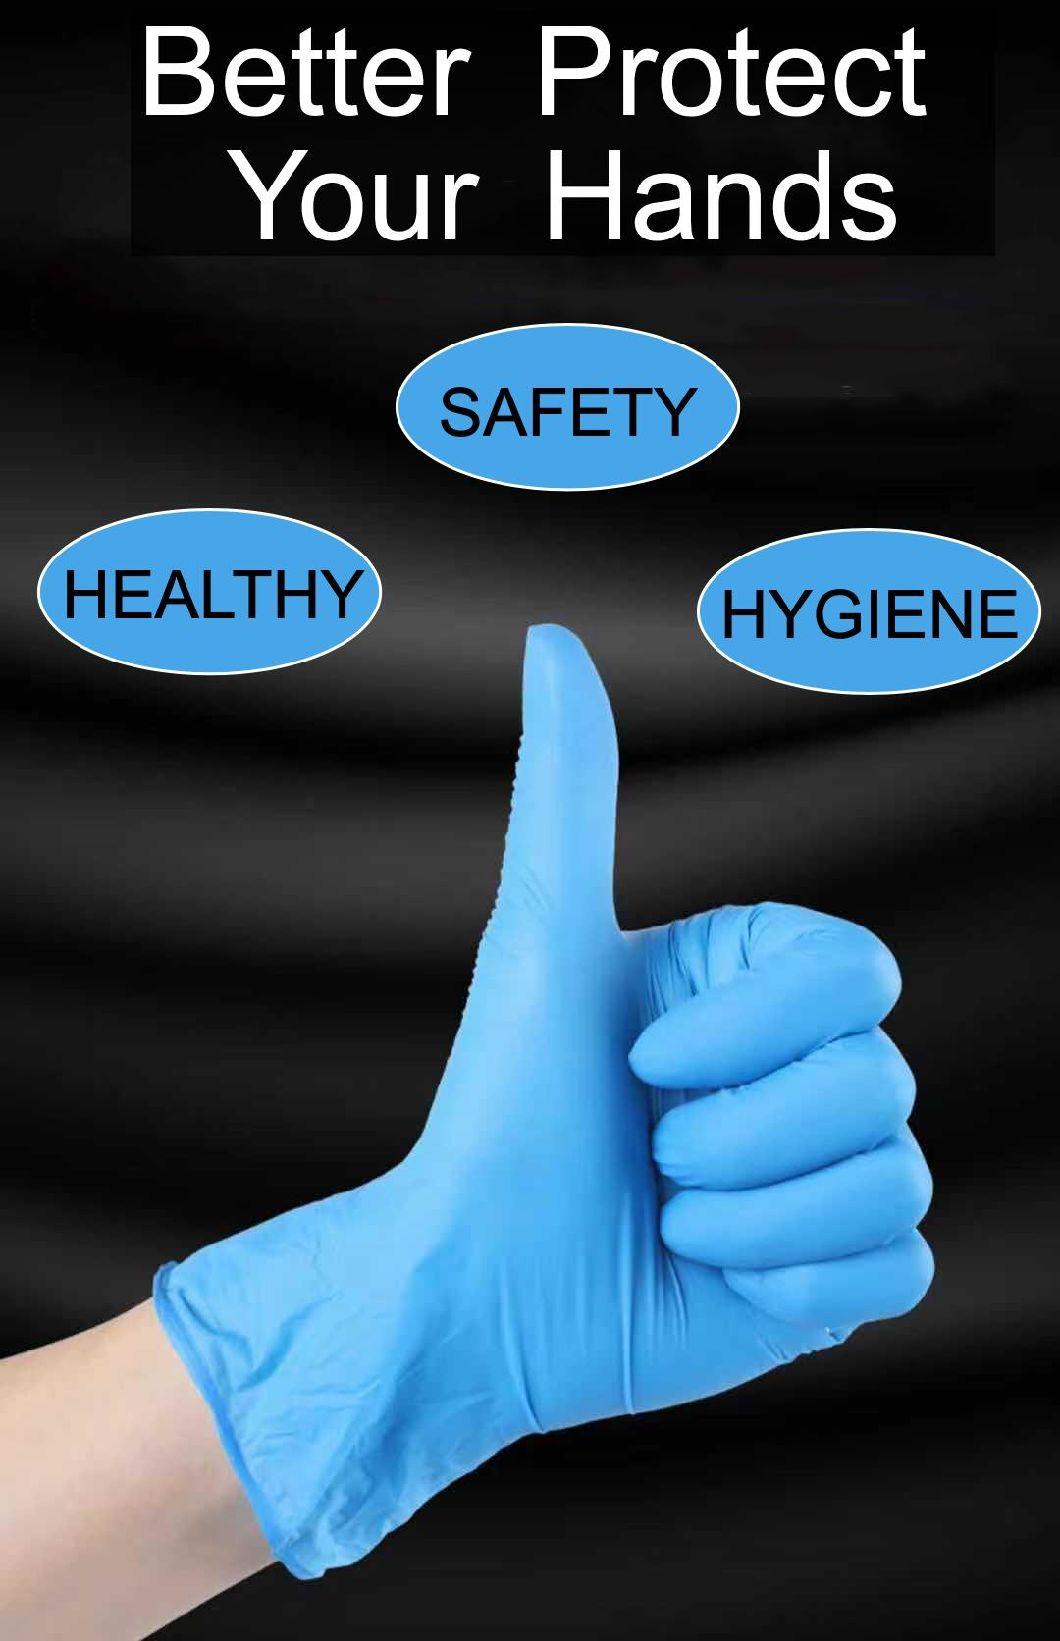 Disposable Nitrile Synthetic Nitrile/Vinyl Examination Gloves with Multicolor